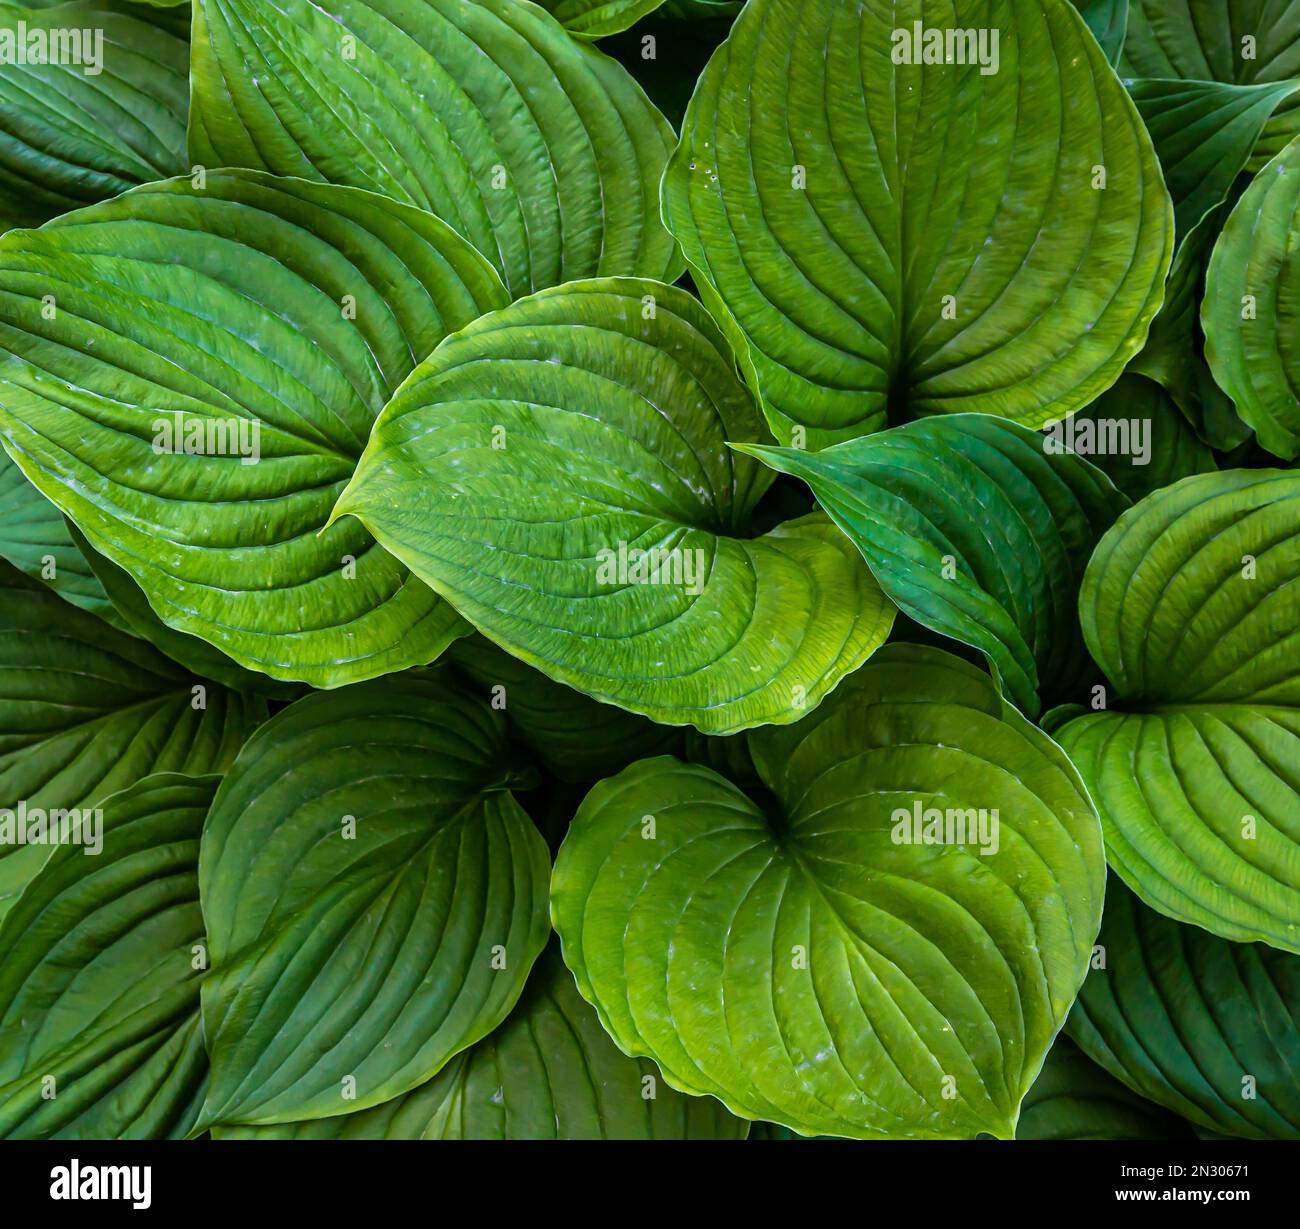 green leaves of plants in the garden. texture Stock Photo - Alamy